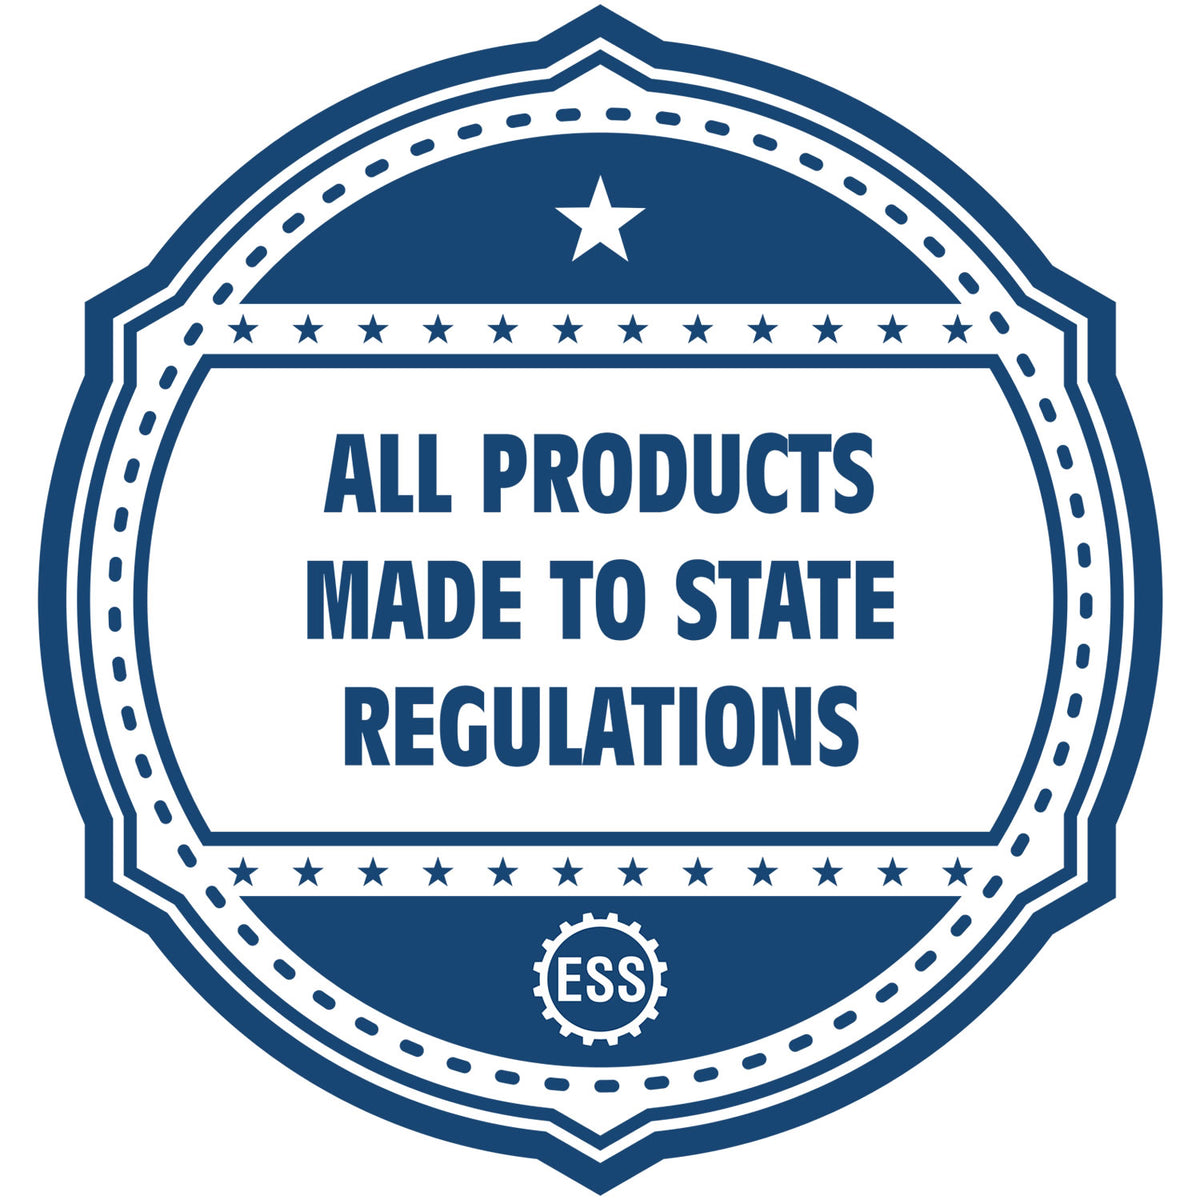 An icon or badge element for the Washington Desk Architect Embossing Seal showing that this product is made in compliance with state regulations.